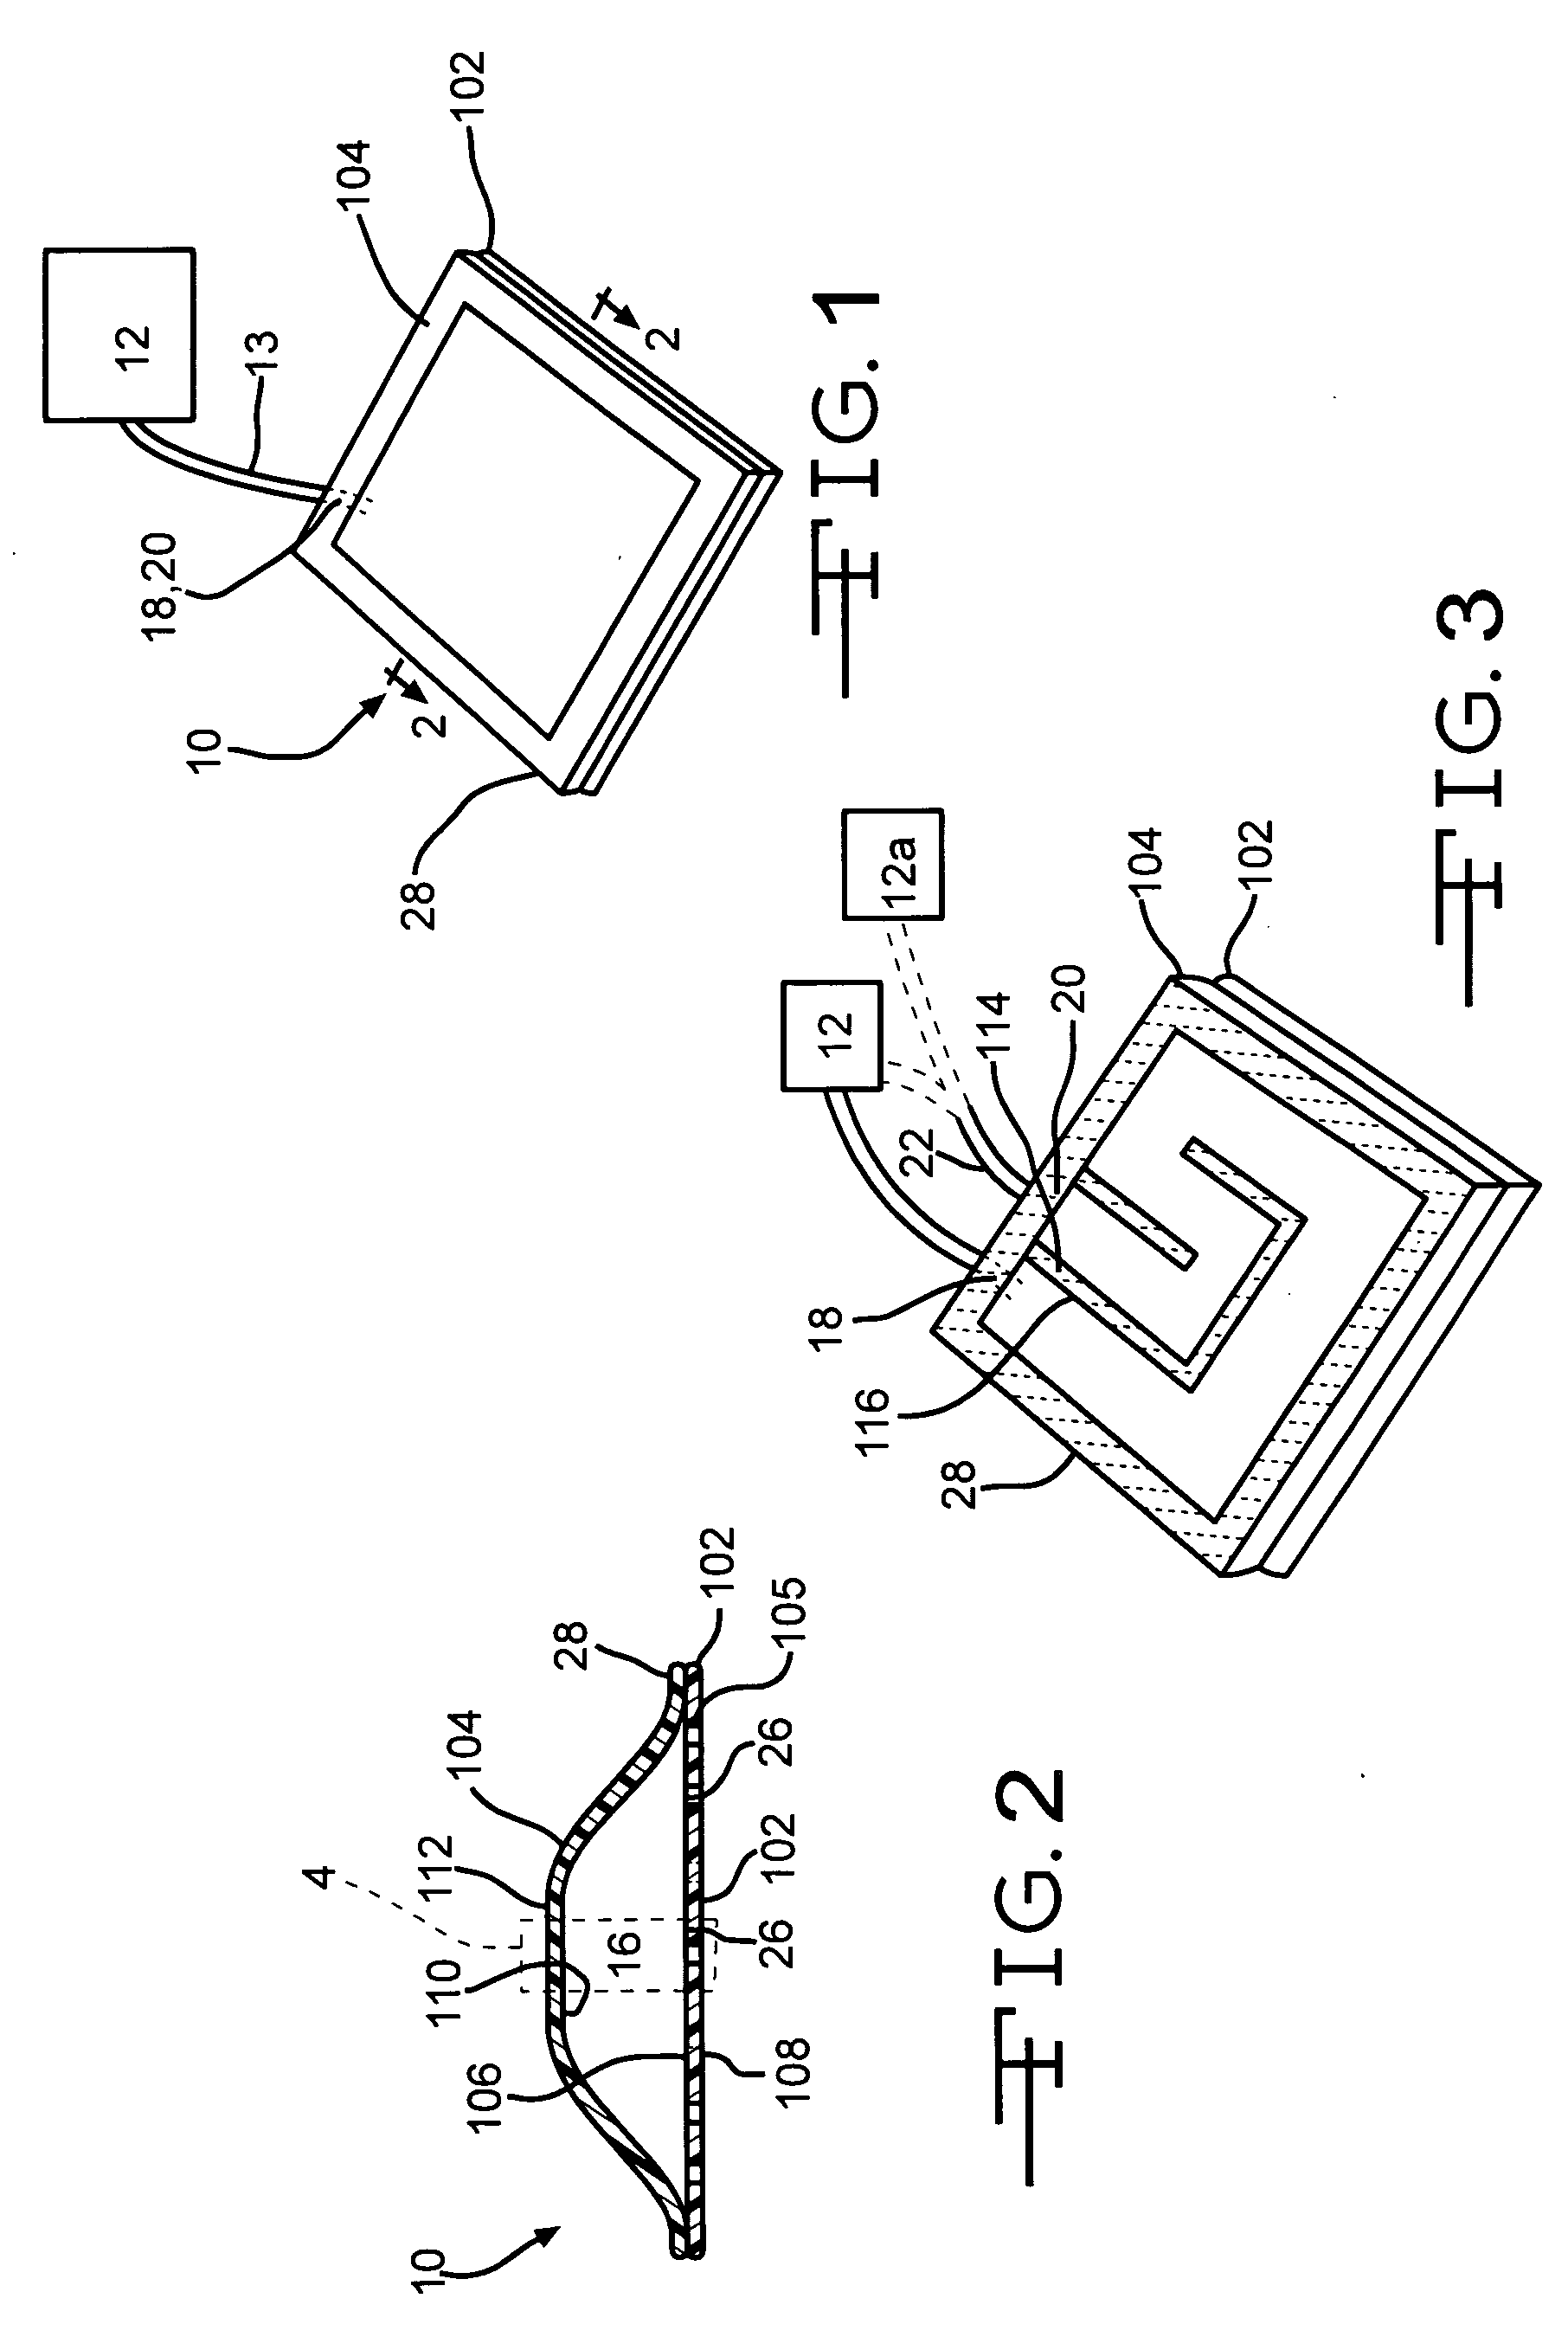 Thermoregulatory device with absorbent material